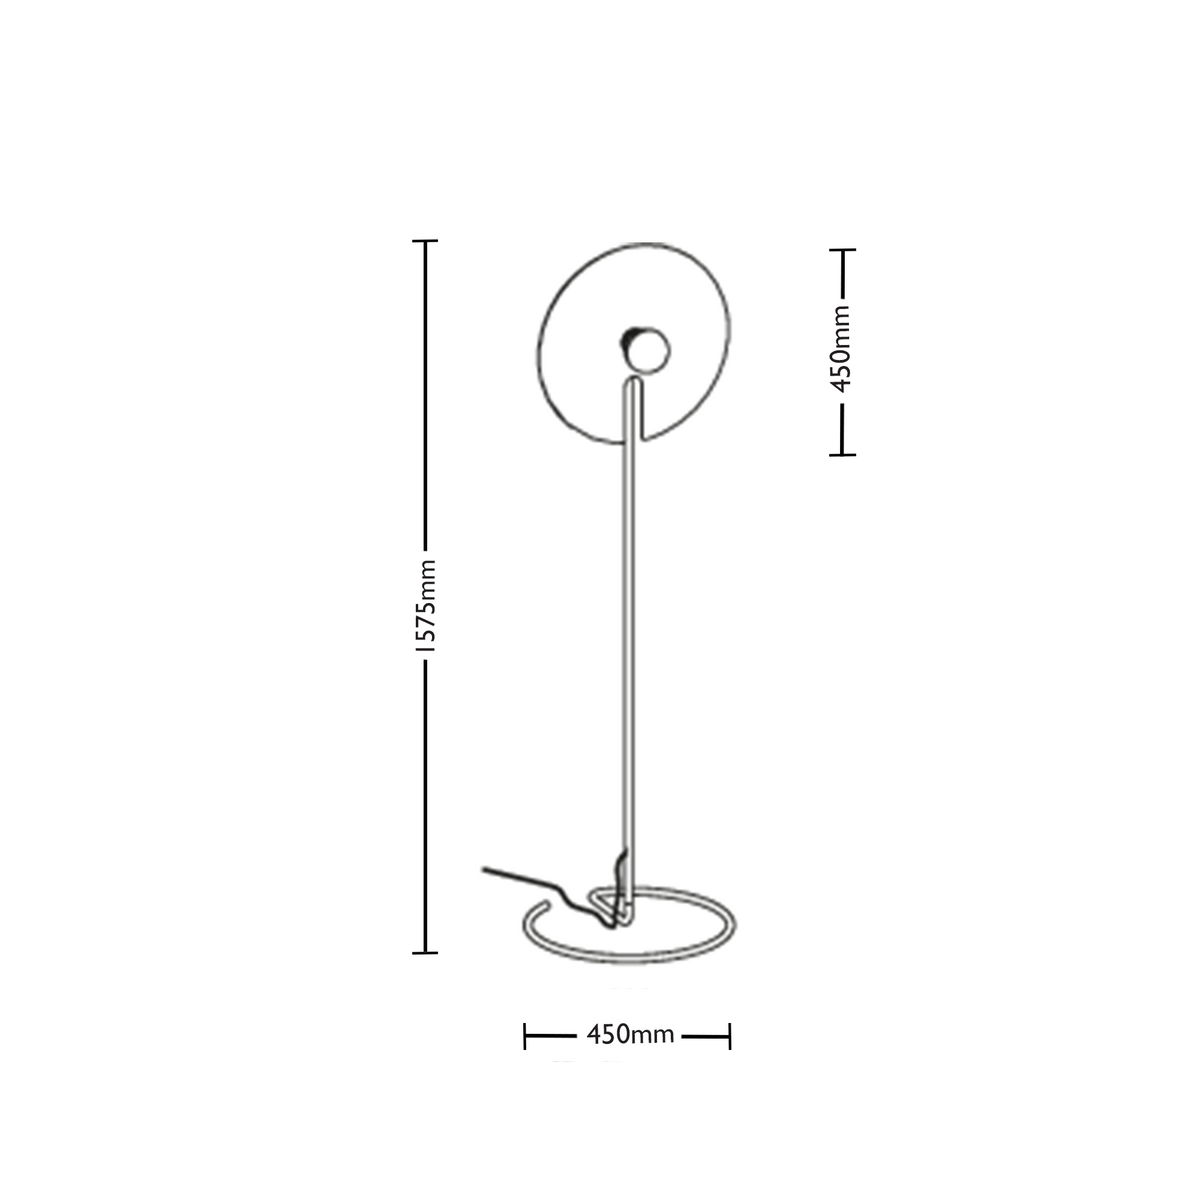 Dimensions for Wever&Ducre Office Mirro Floor Lamp 2.0